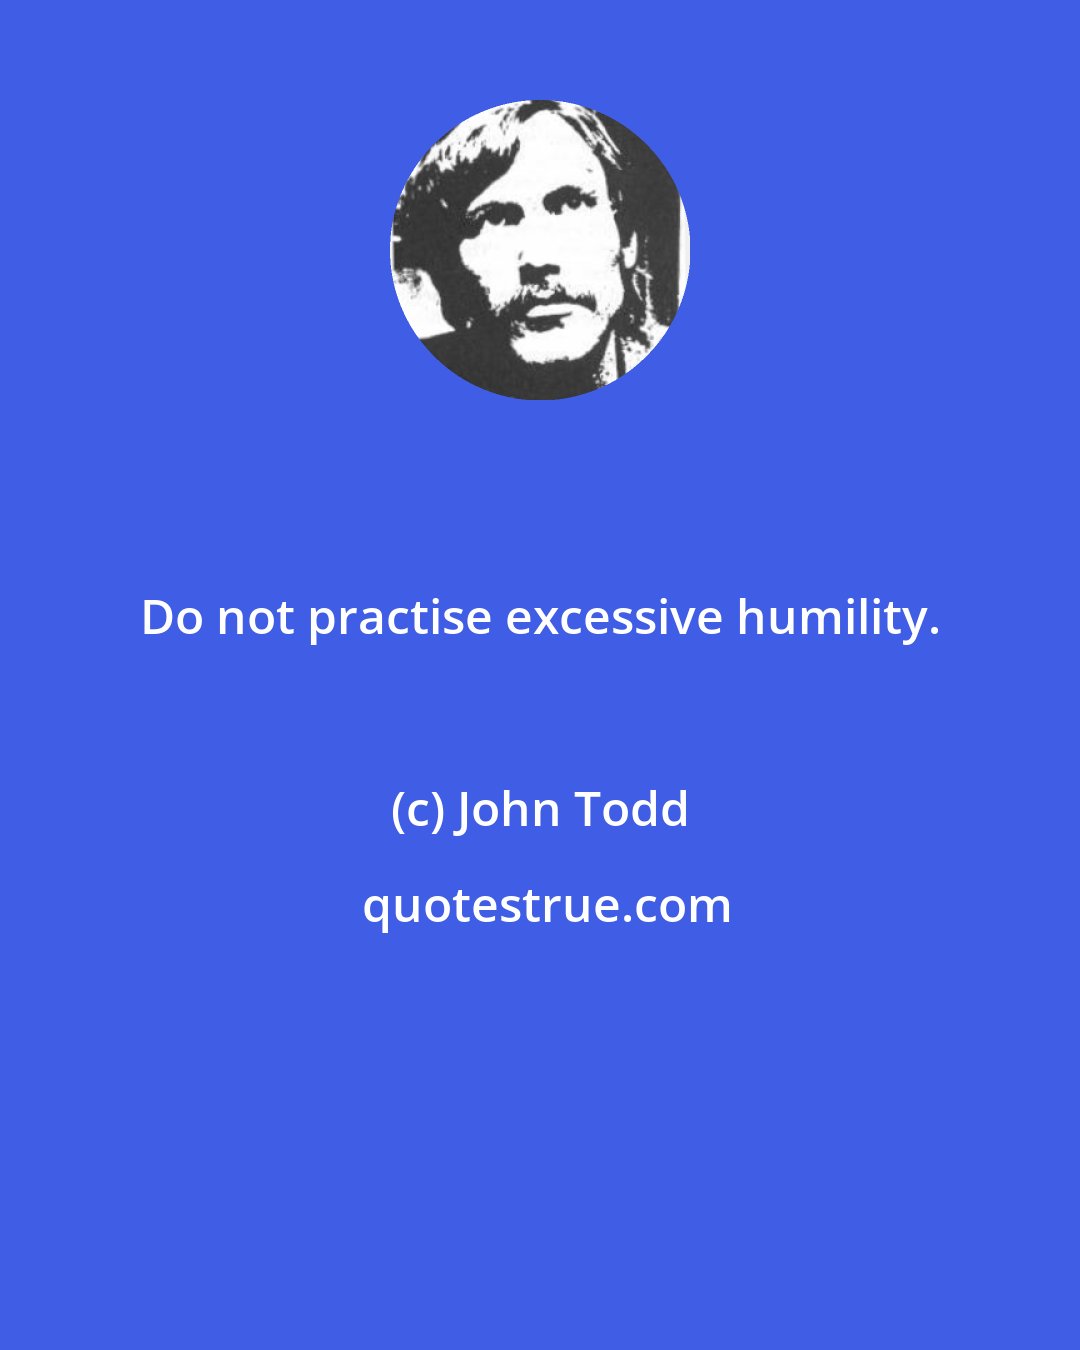 John Todd: Do not practise excessive humility.